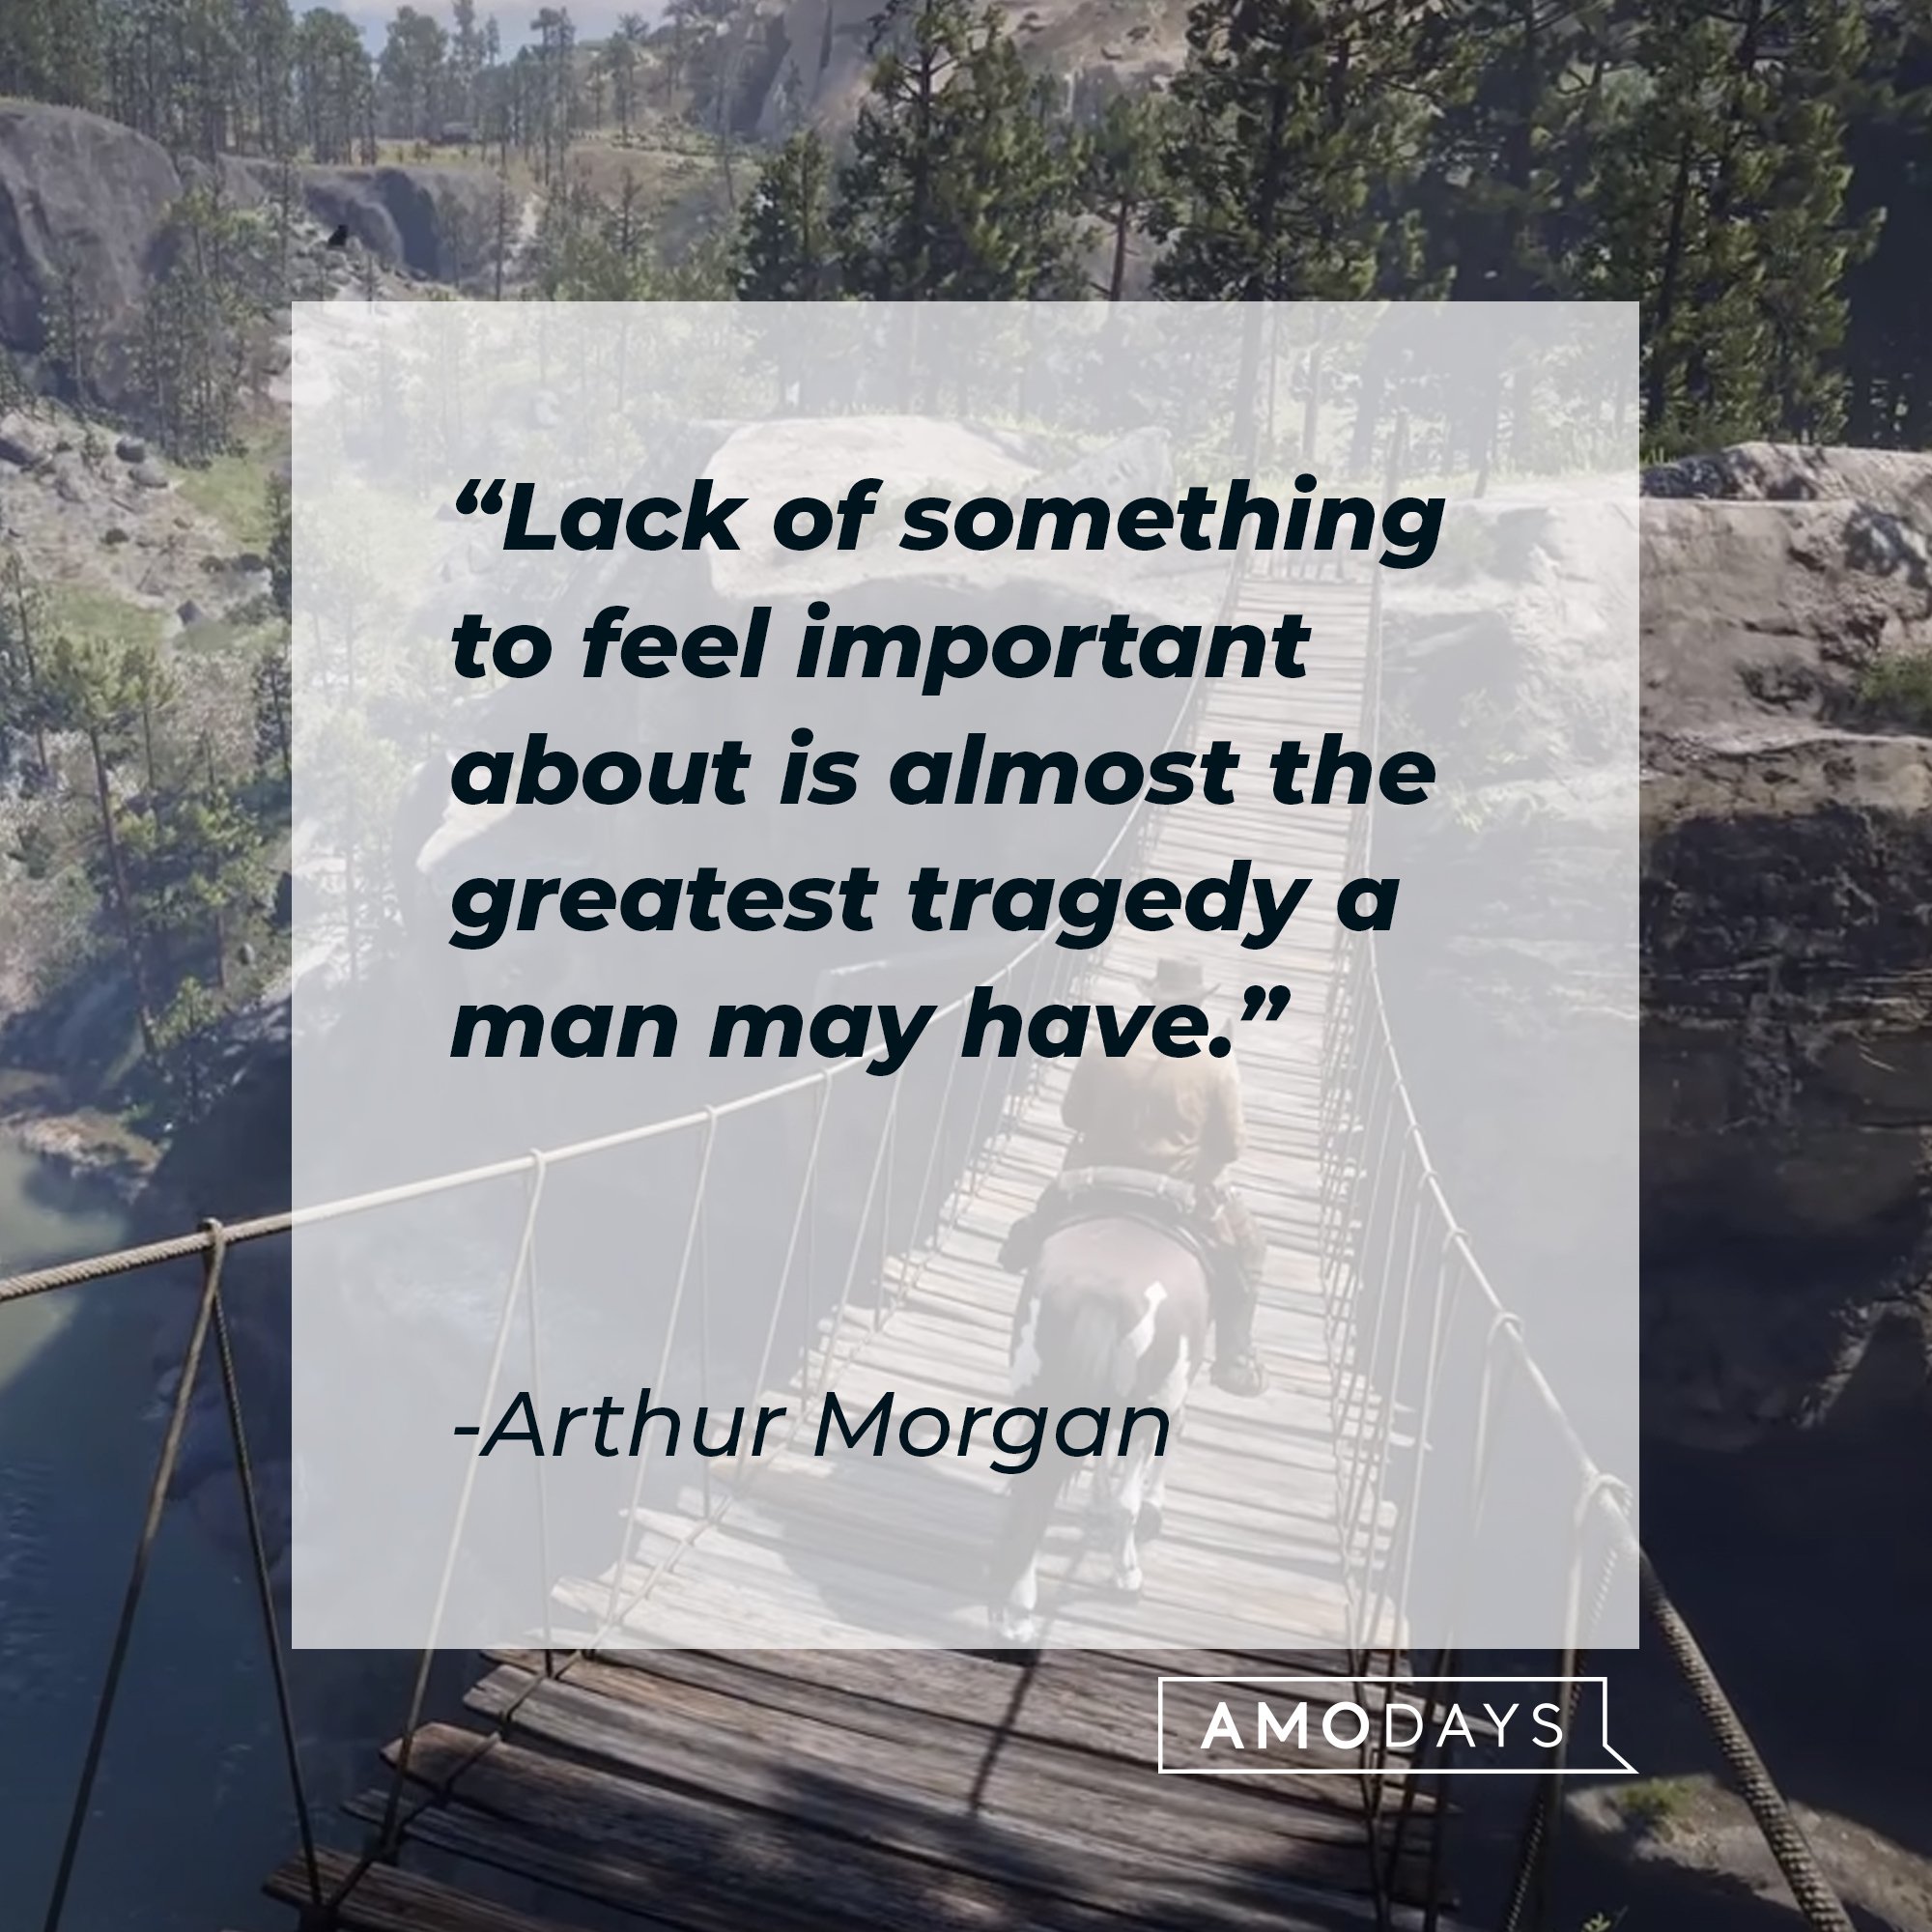 Arthur Morgan's quote: "Lack of something to feel important about is almost the greatest tragedy a man may have." | Image: AmoDays